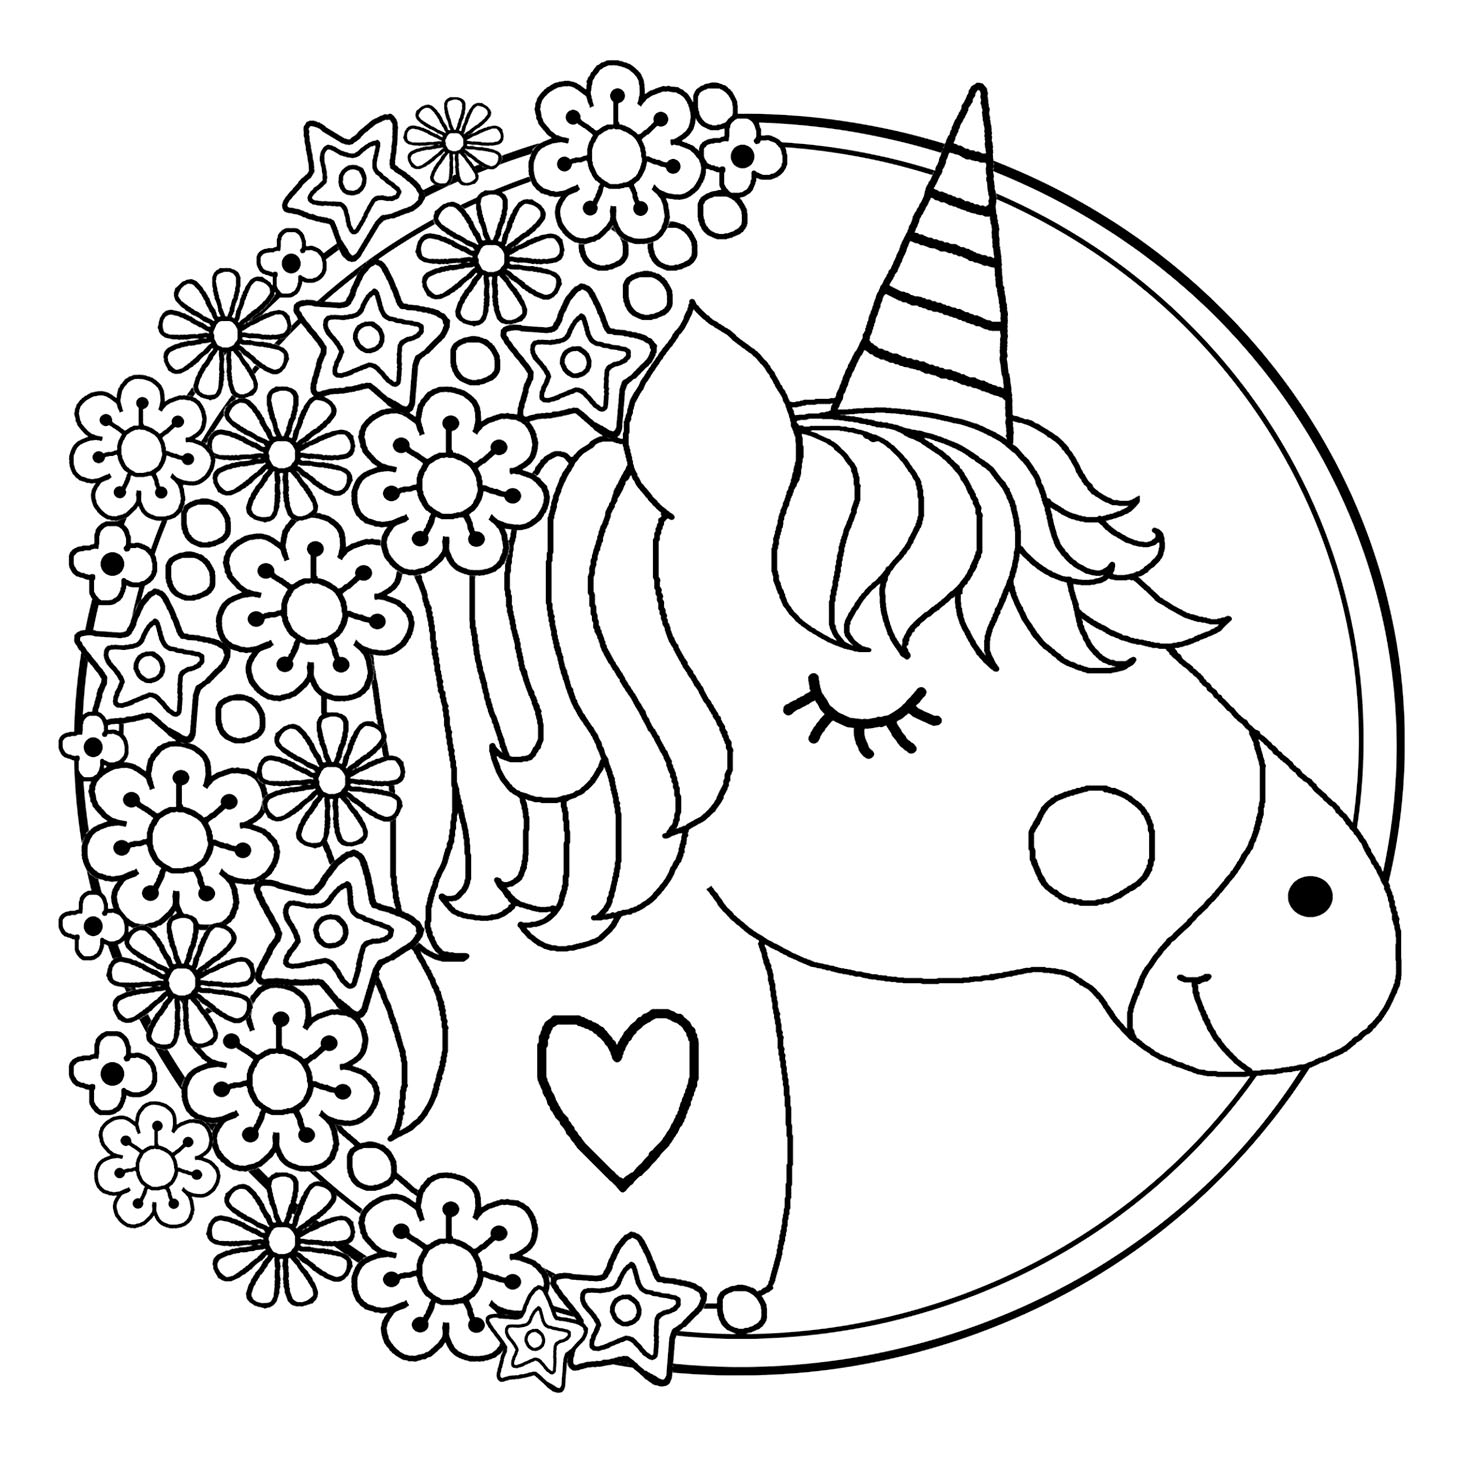 Printable Unicorn and Flowers Coloring Page for kids.